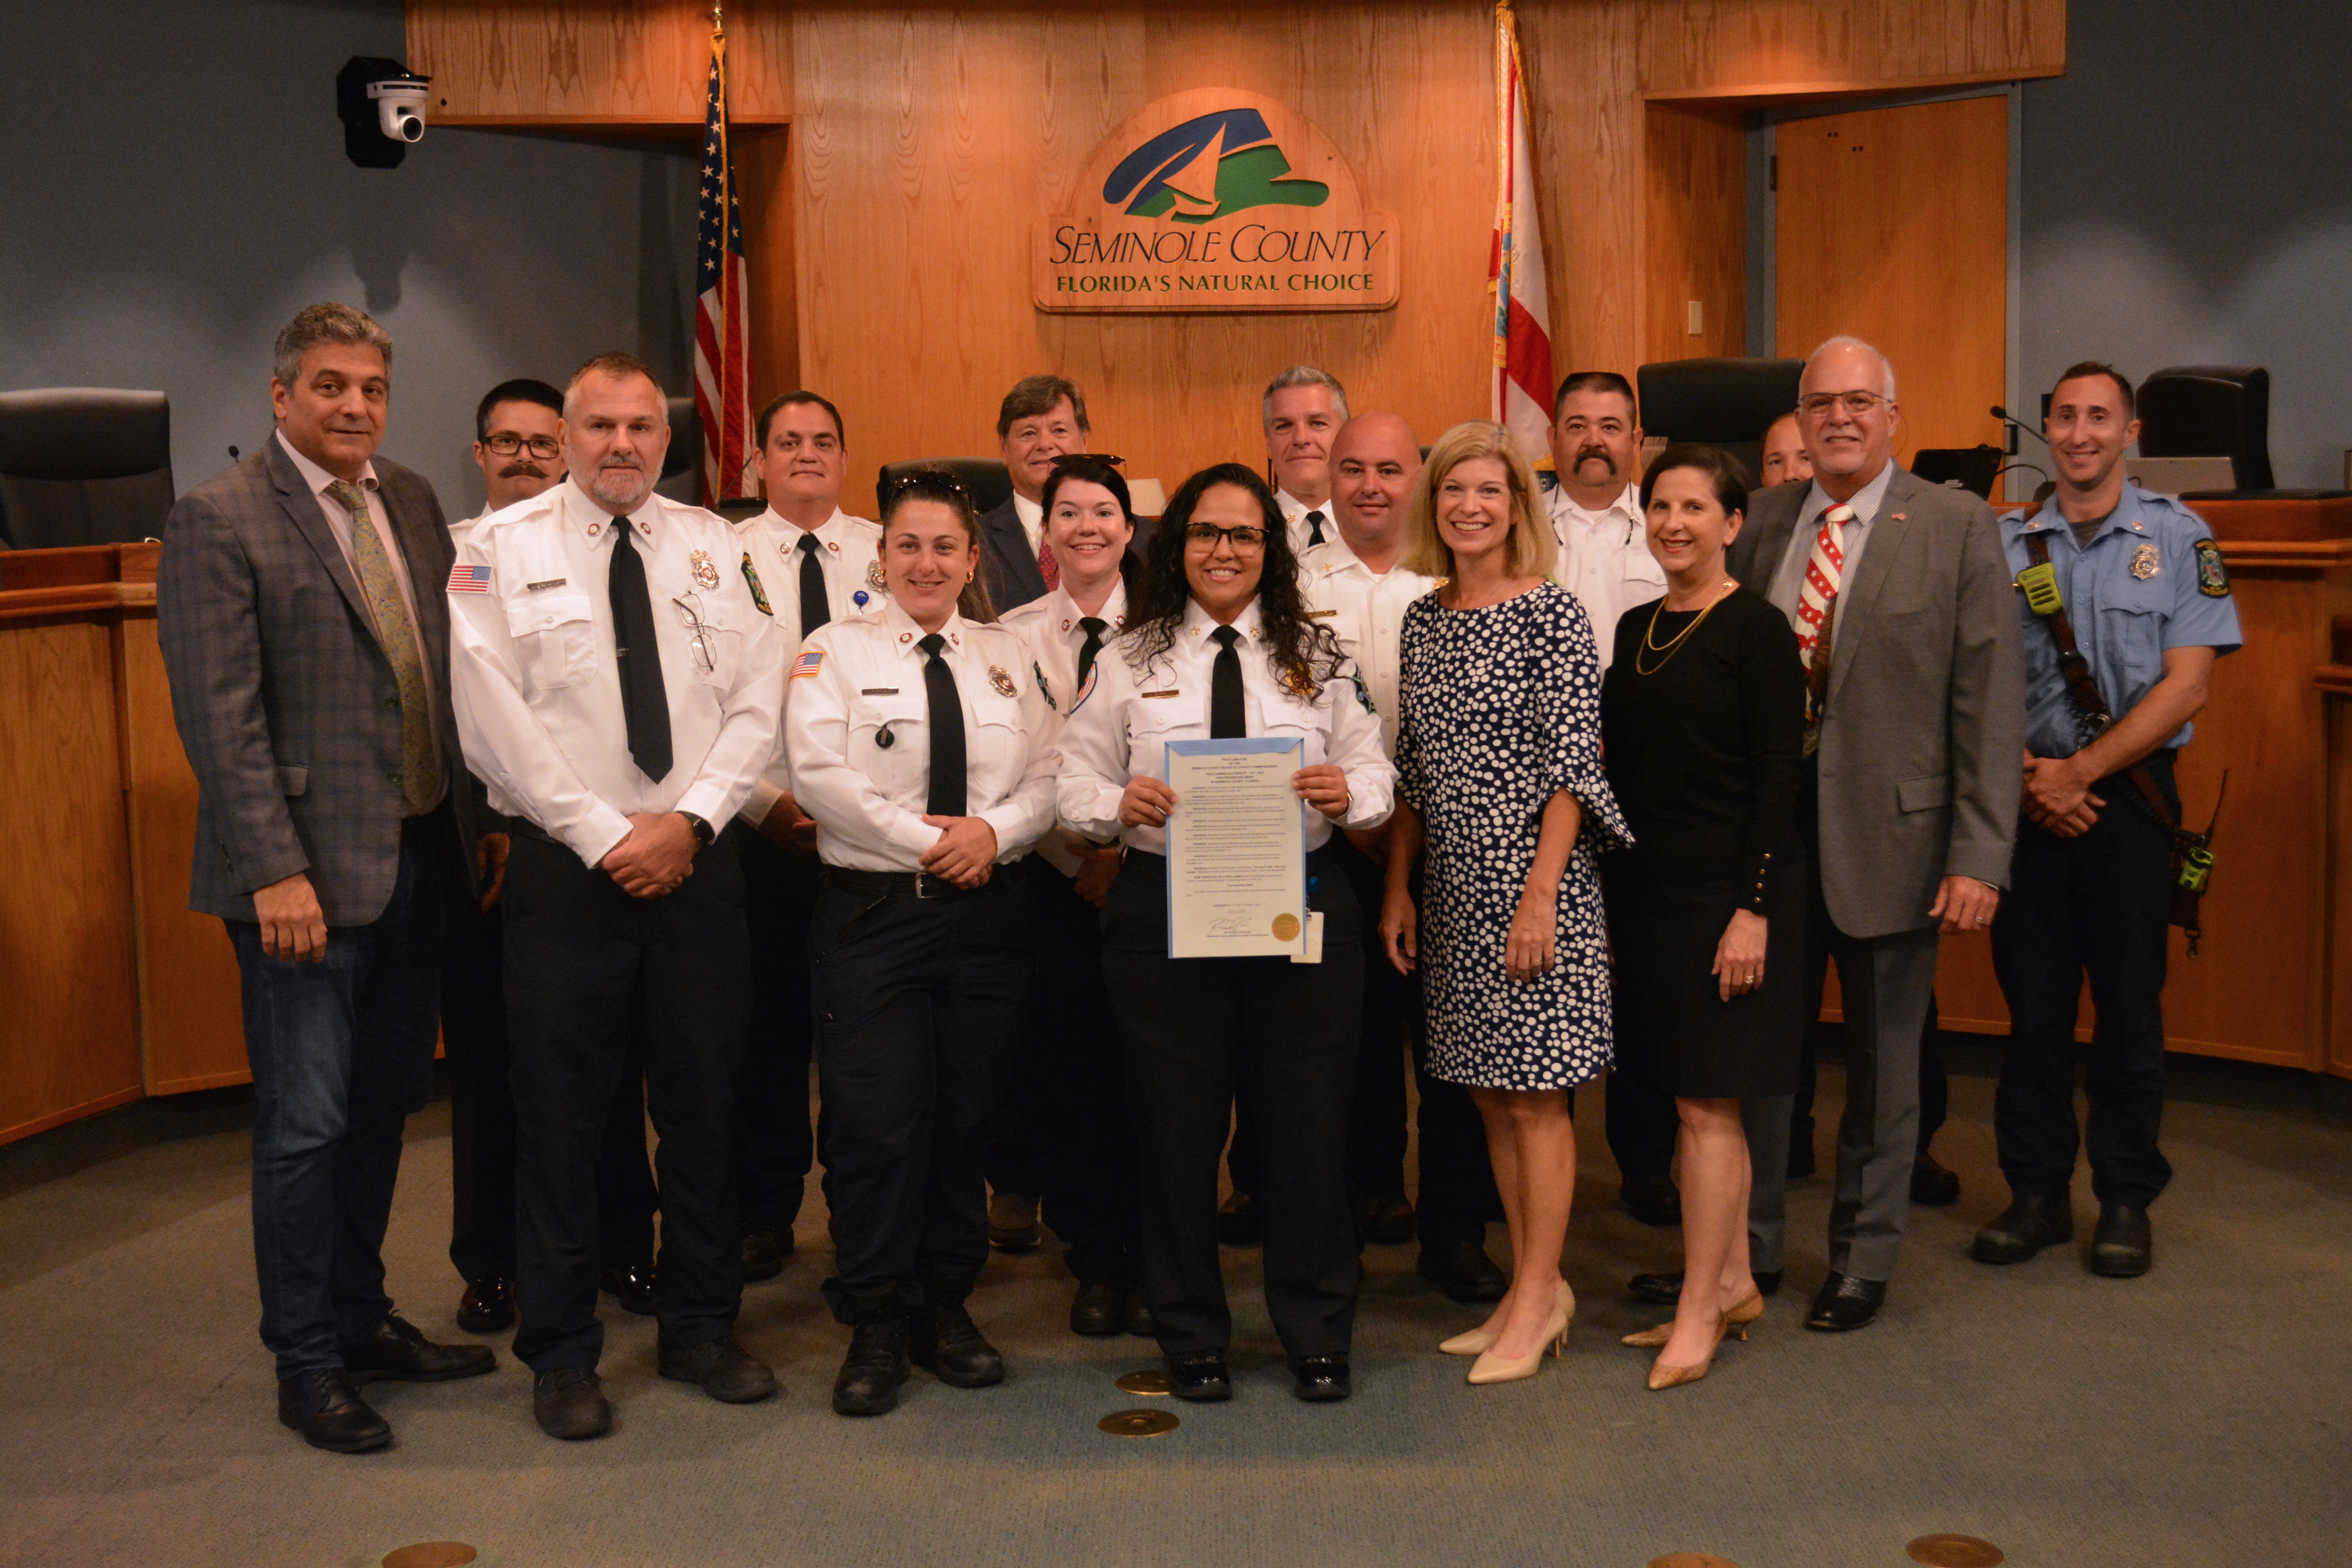 Proclamation proclaiming October 9th - 15th as Fire Prevention Week in Seminole County.  (Matt Kinley, Director/Fire Chief)